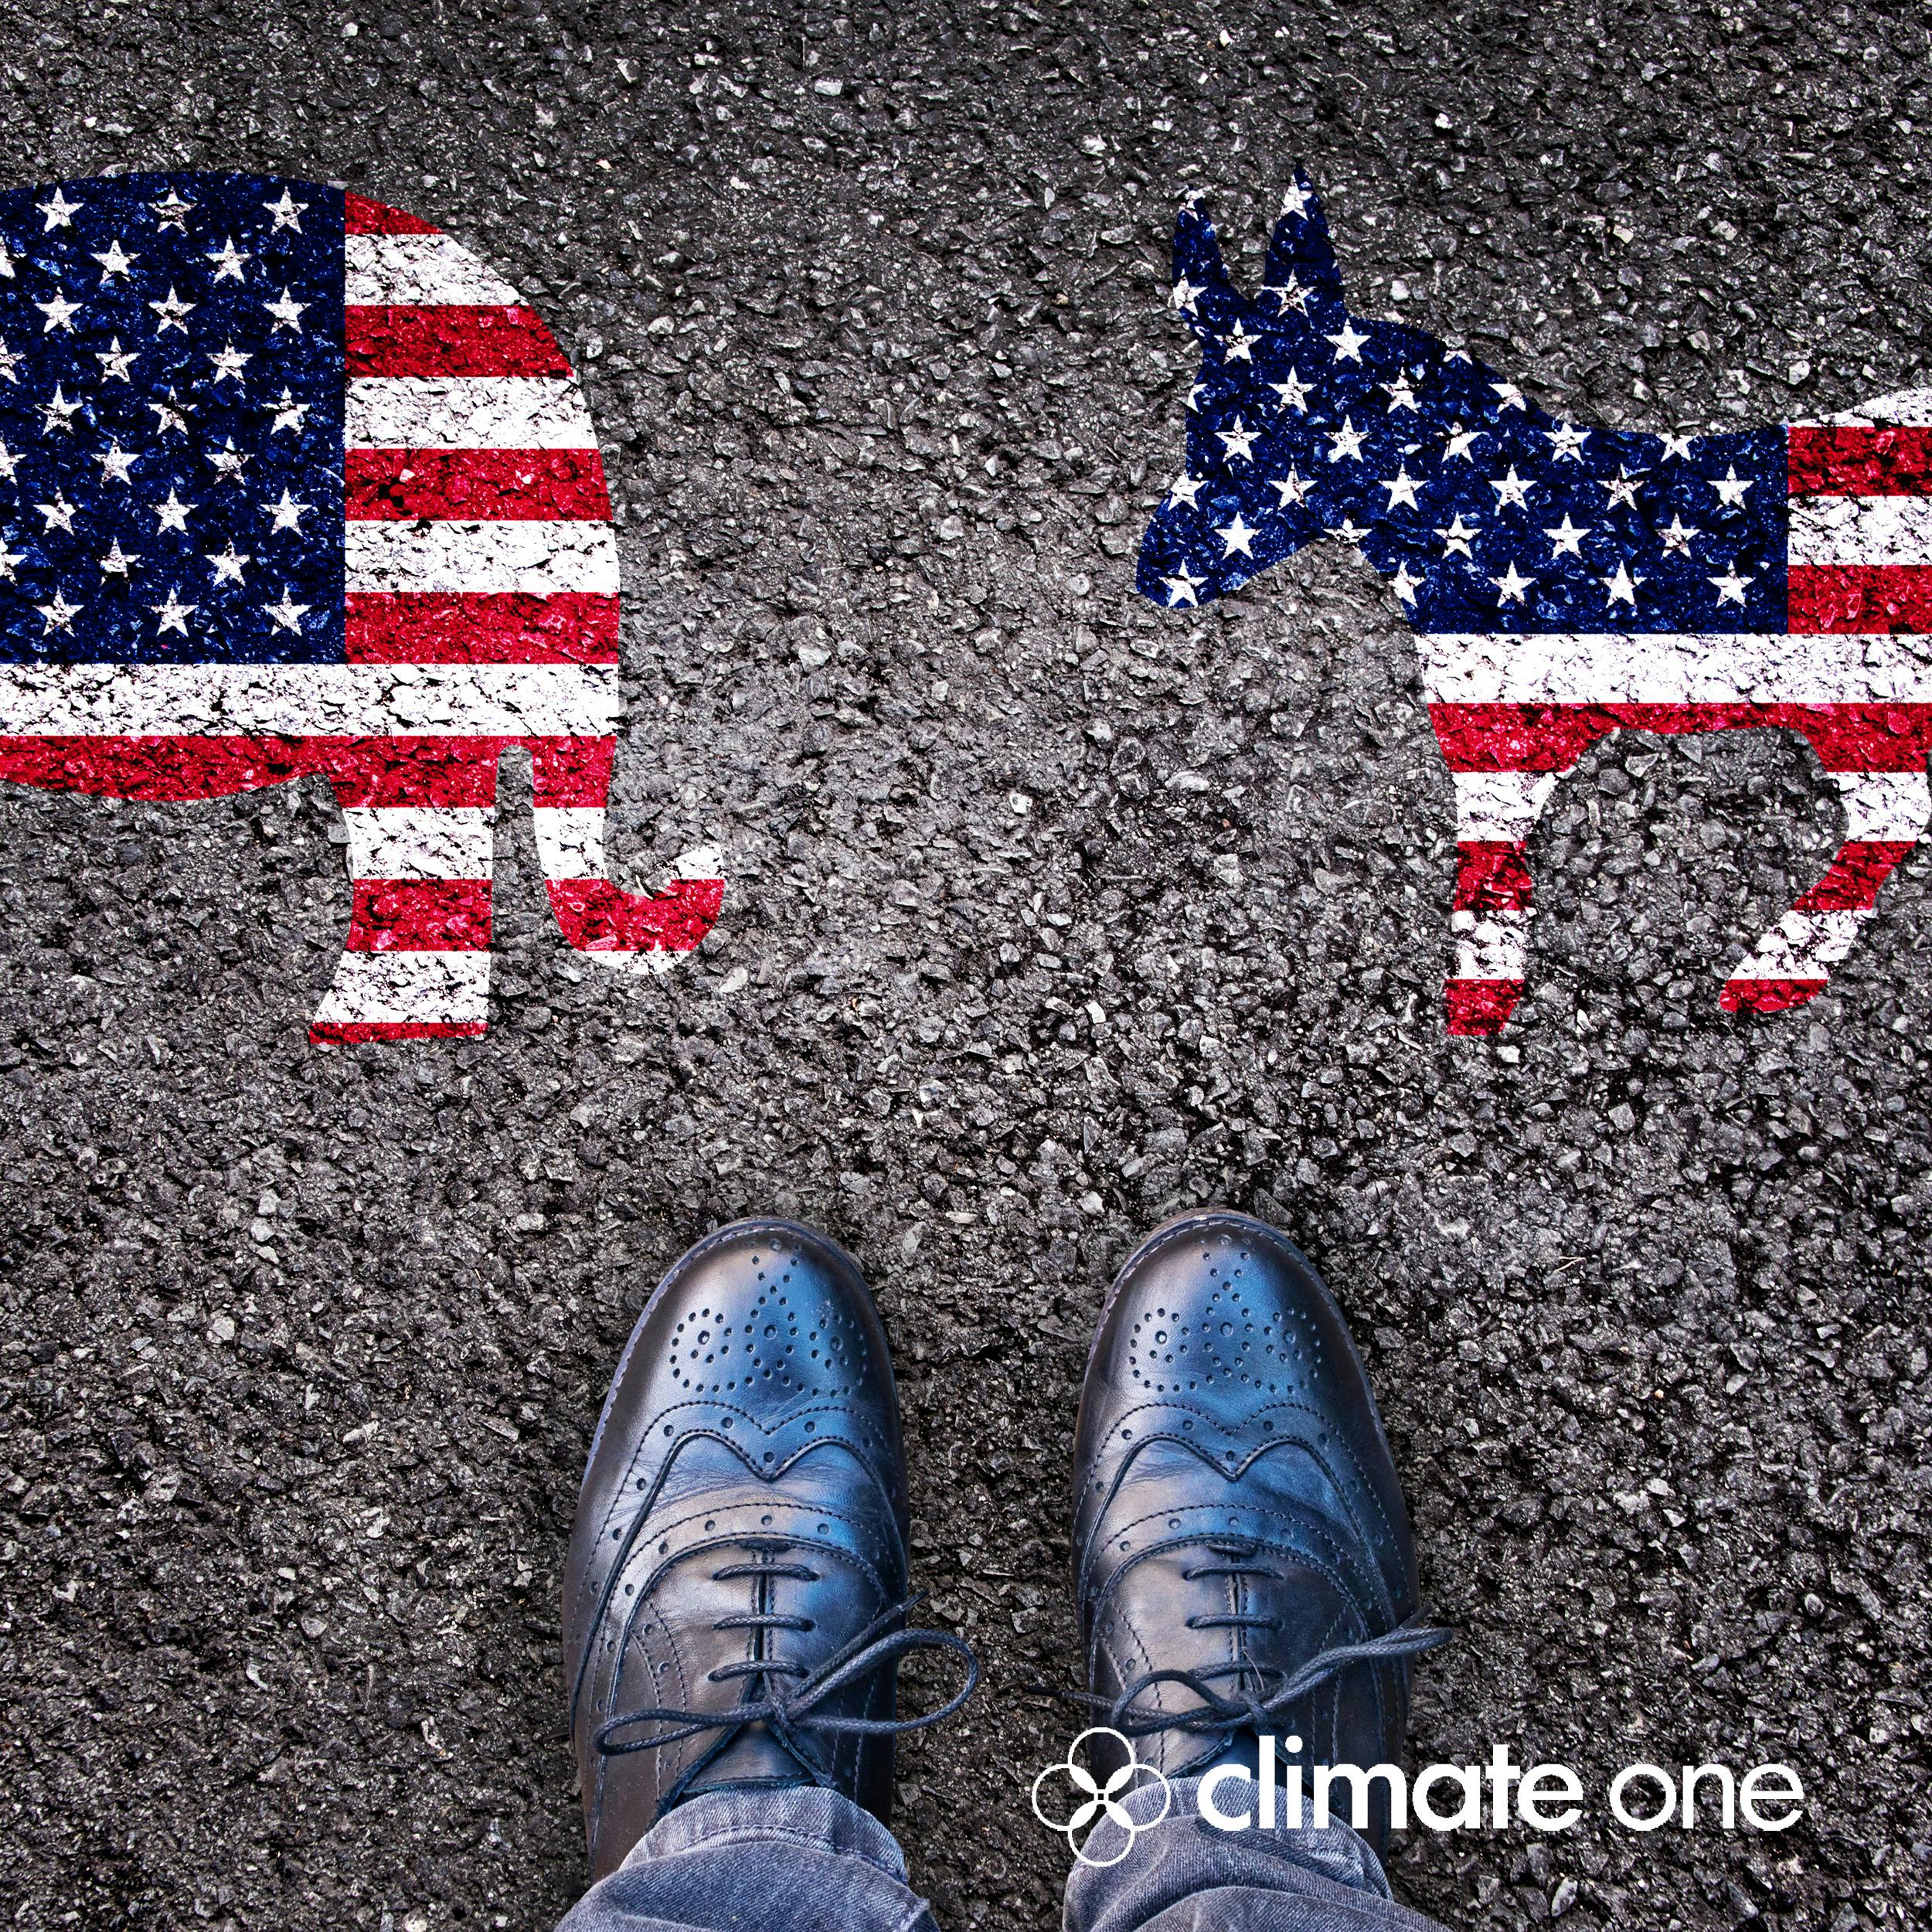 Which Way Are Swing Voters Swinging on Climate?